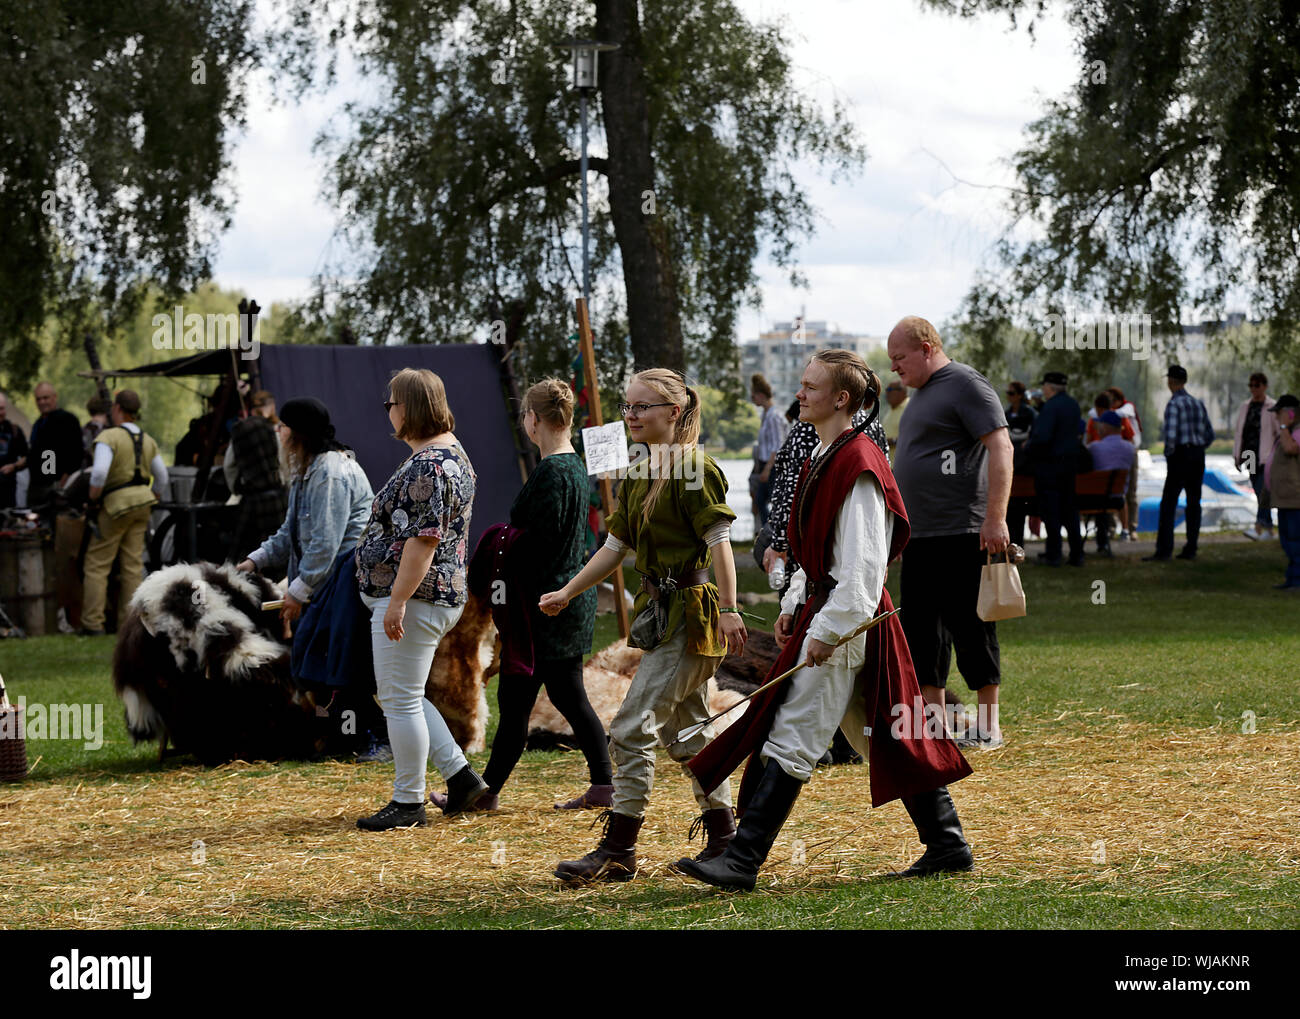 Hameenlinna Finland 08/17/2019 Medieval festival with craftsman, knights and entertainers.  The audience enjoys the sunny day in public park Stock Photo